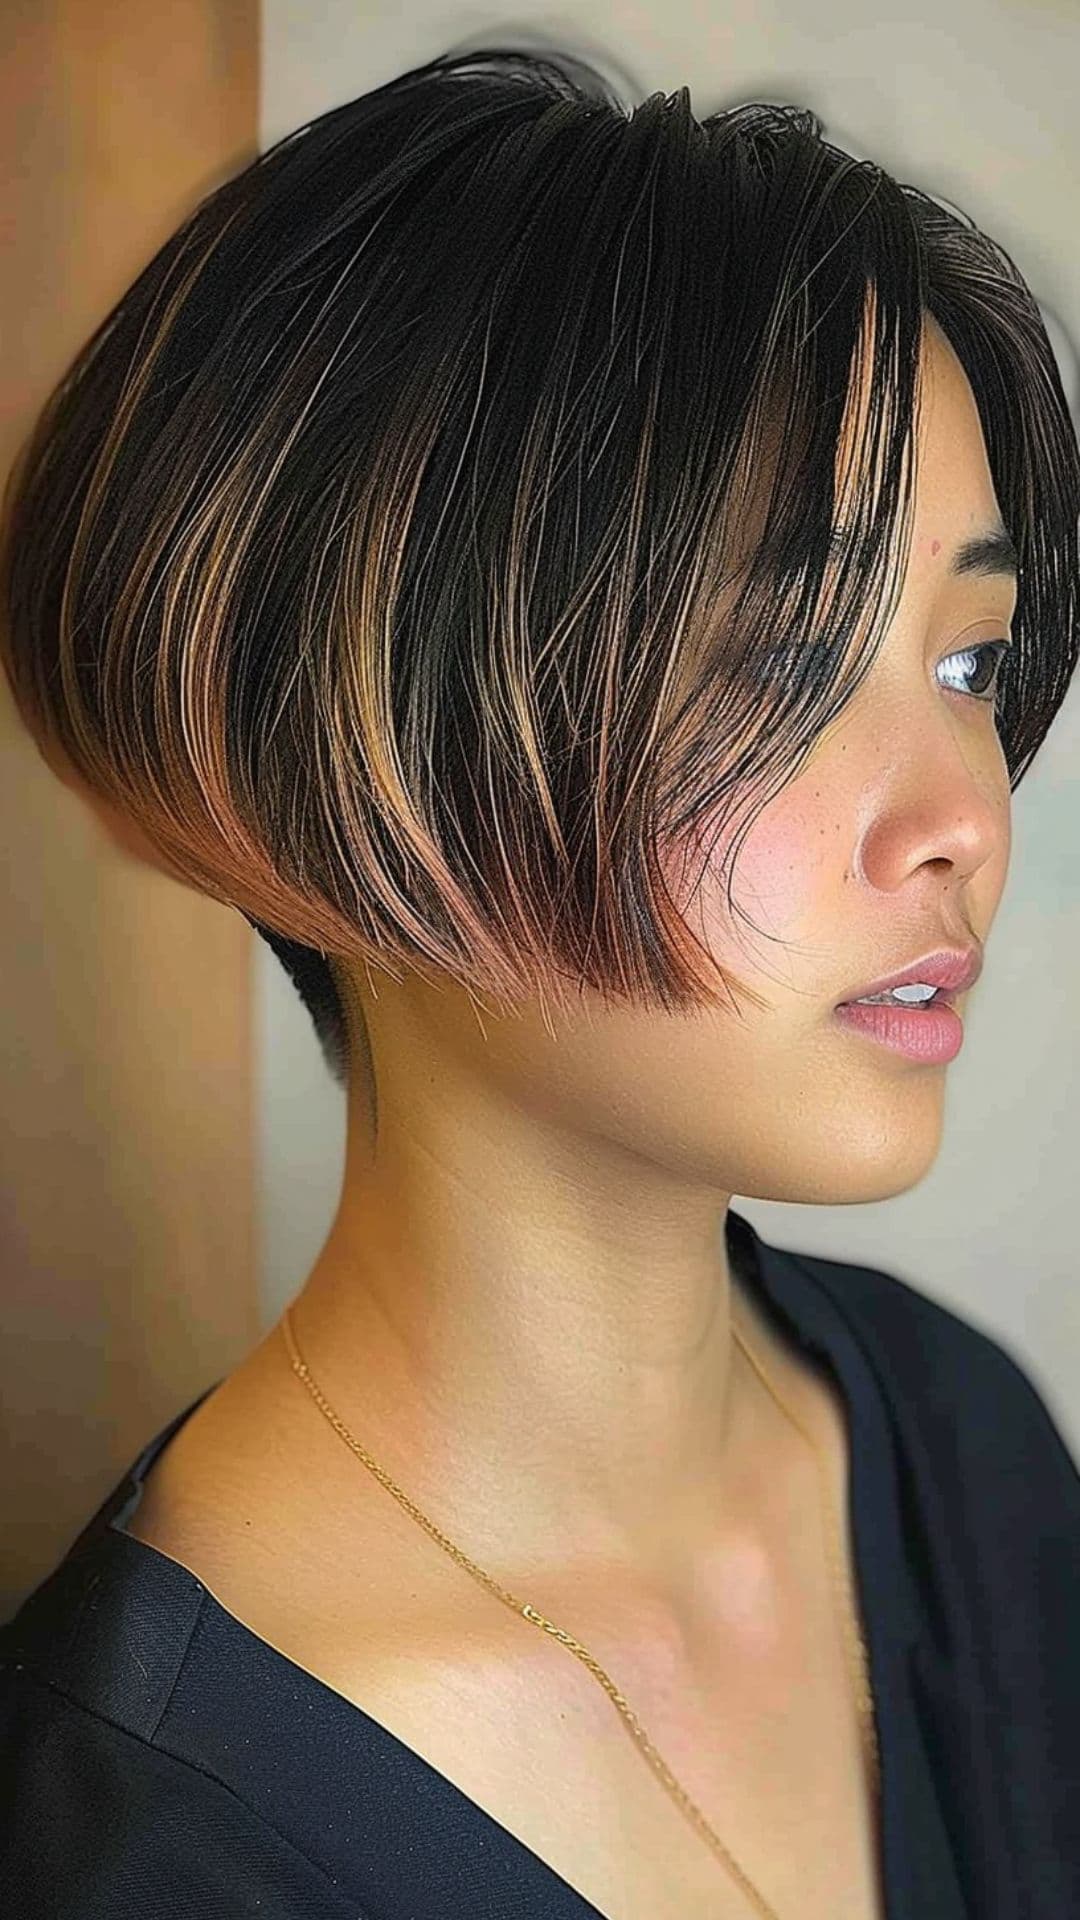 A woman modelling a short stacked bob for round faces haircut.